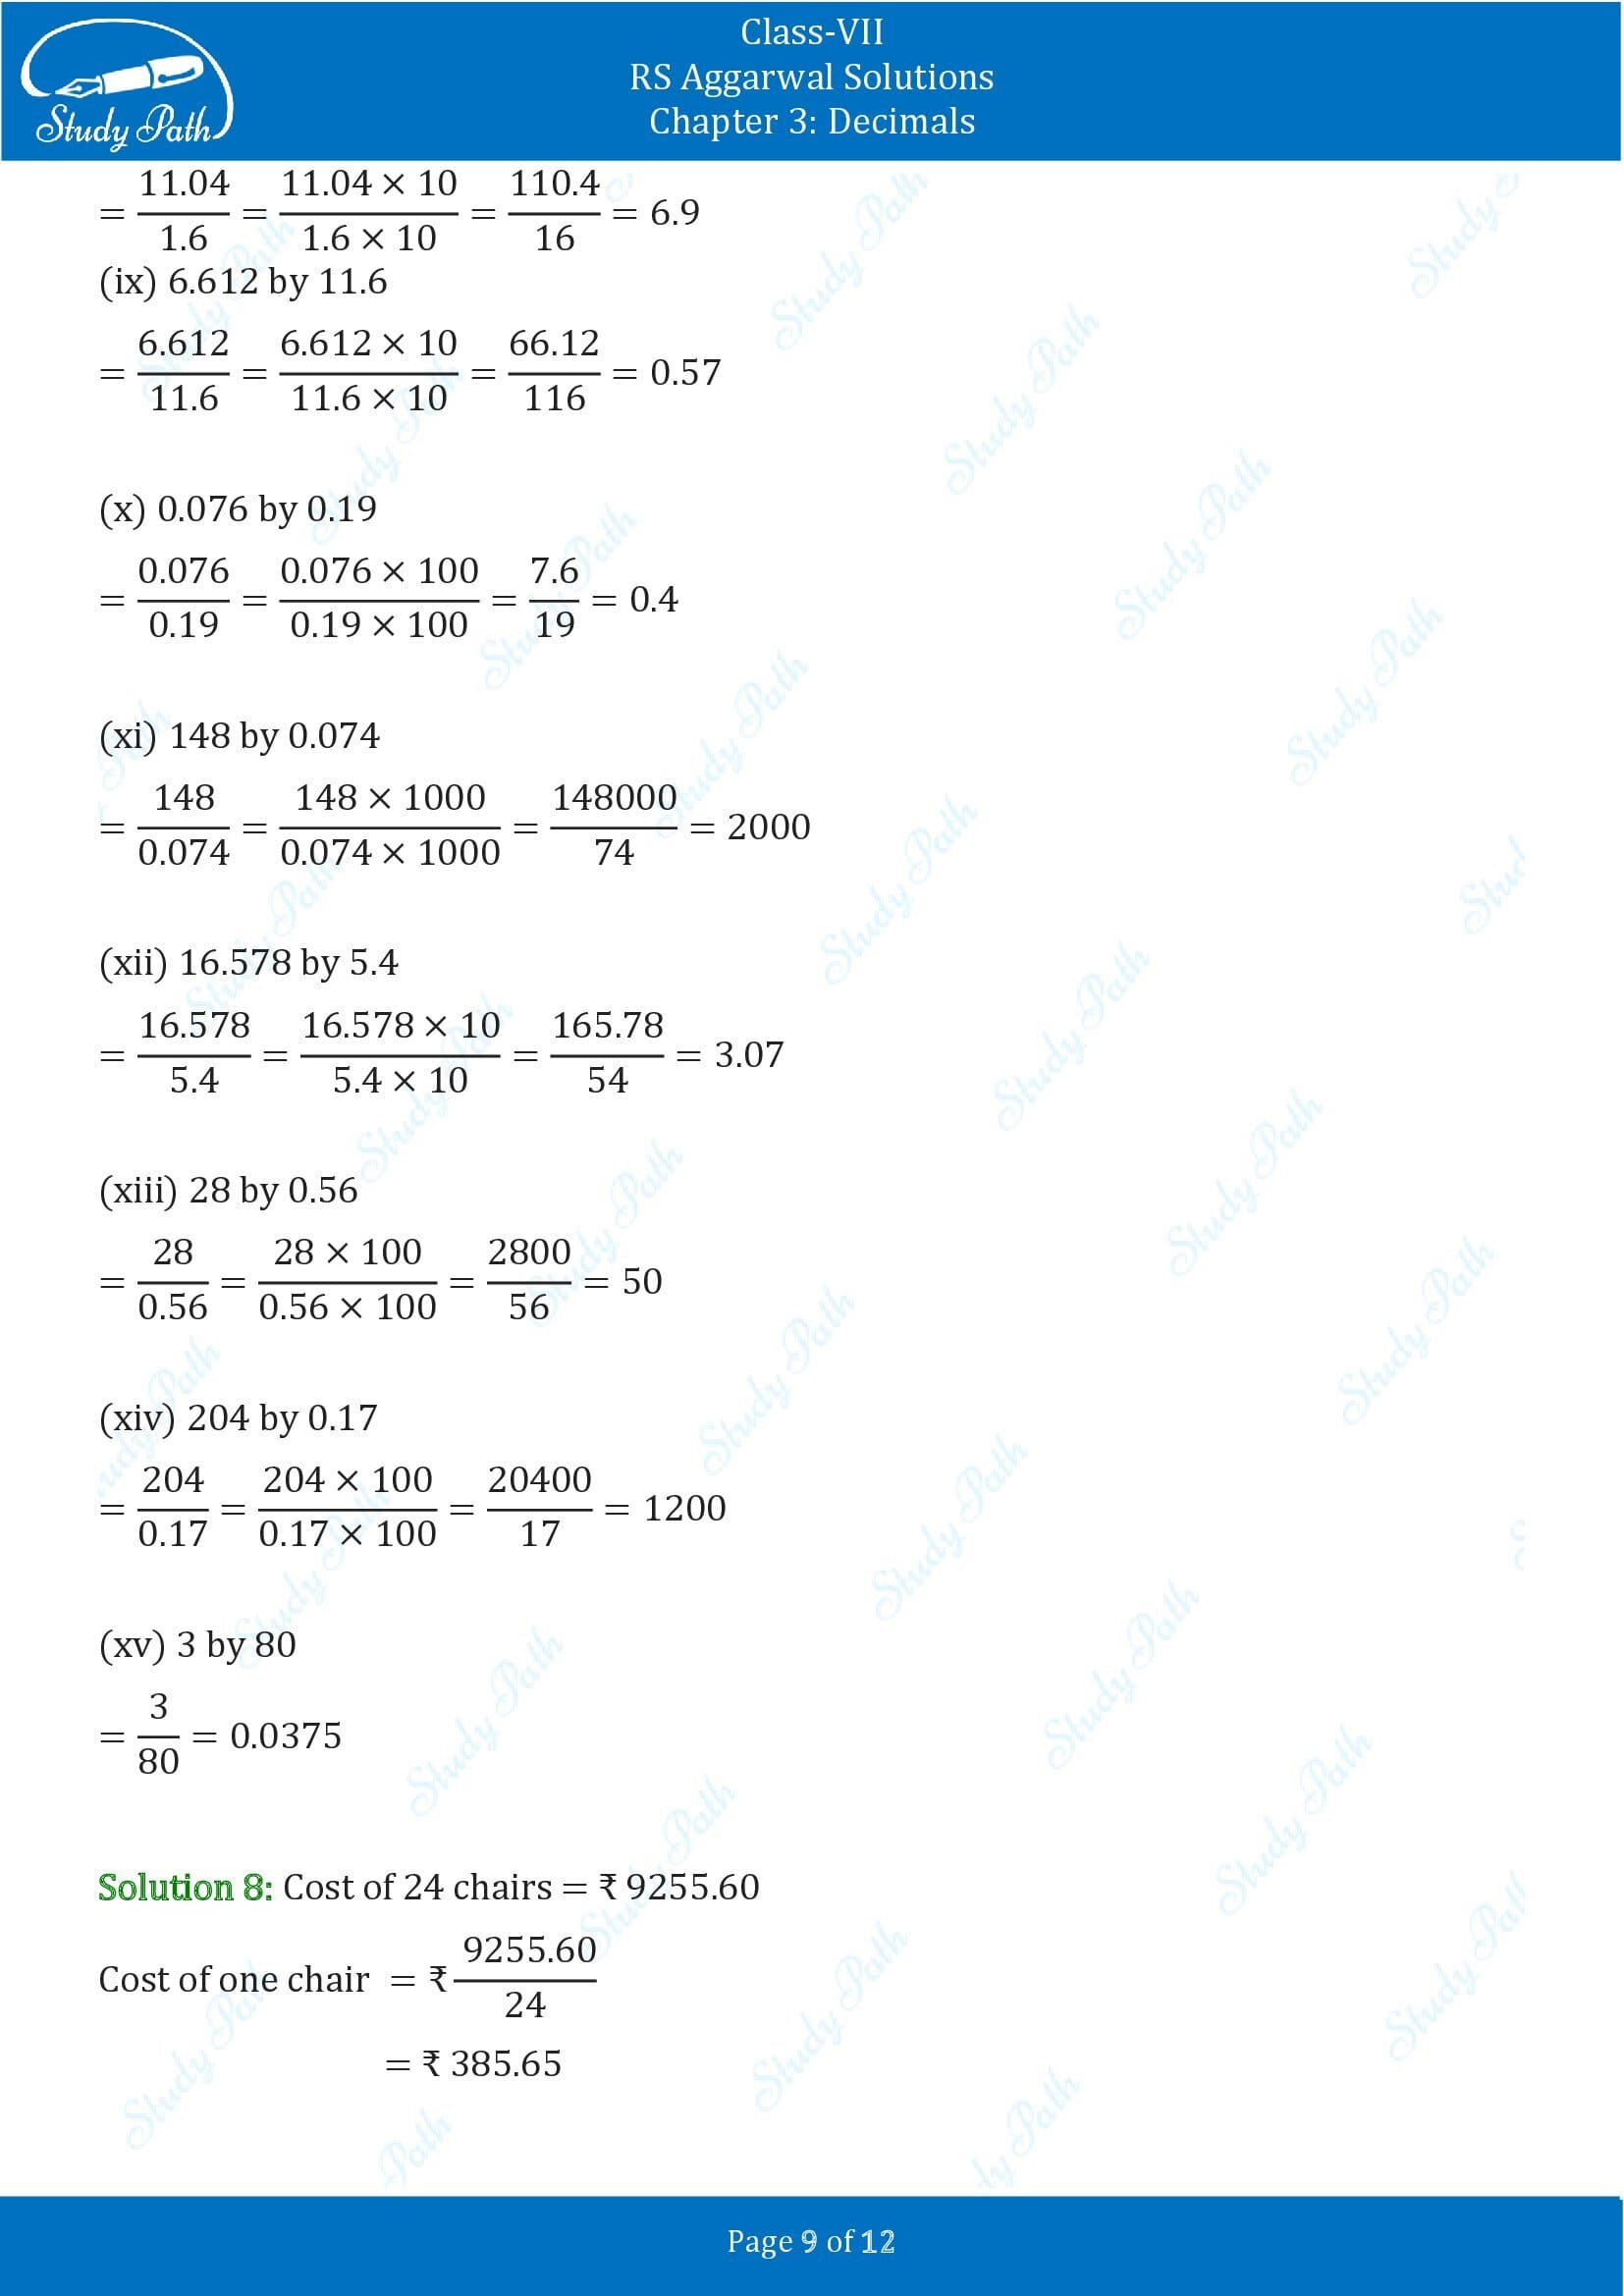 RS Aggarwal Solutions Class 7 Chapter 3 Decimals Exercise 3D 00009